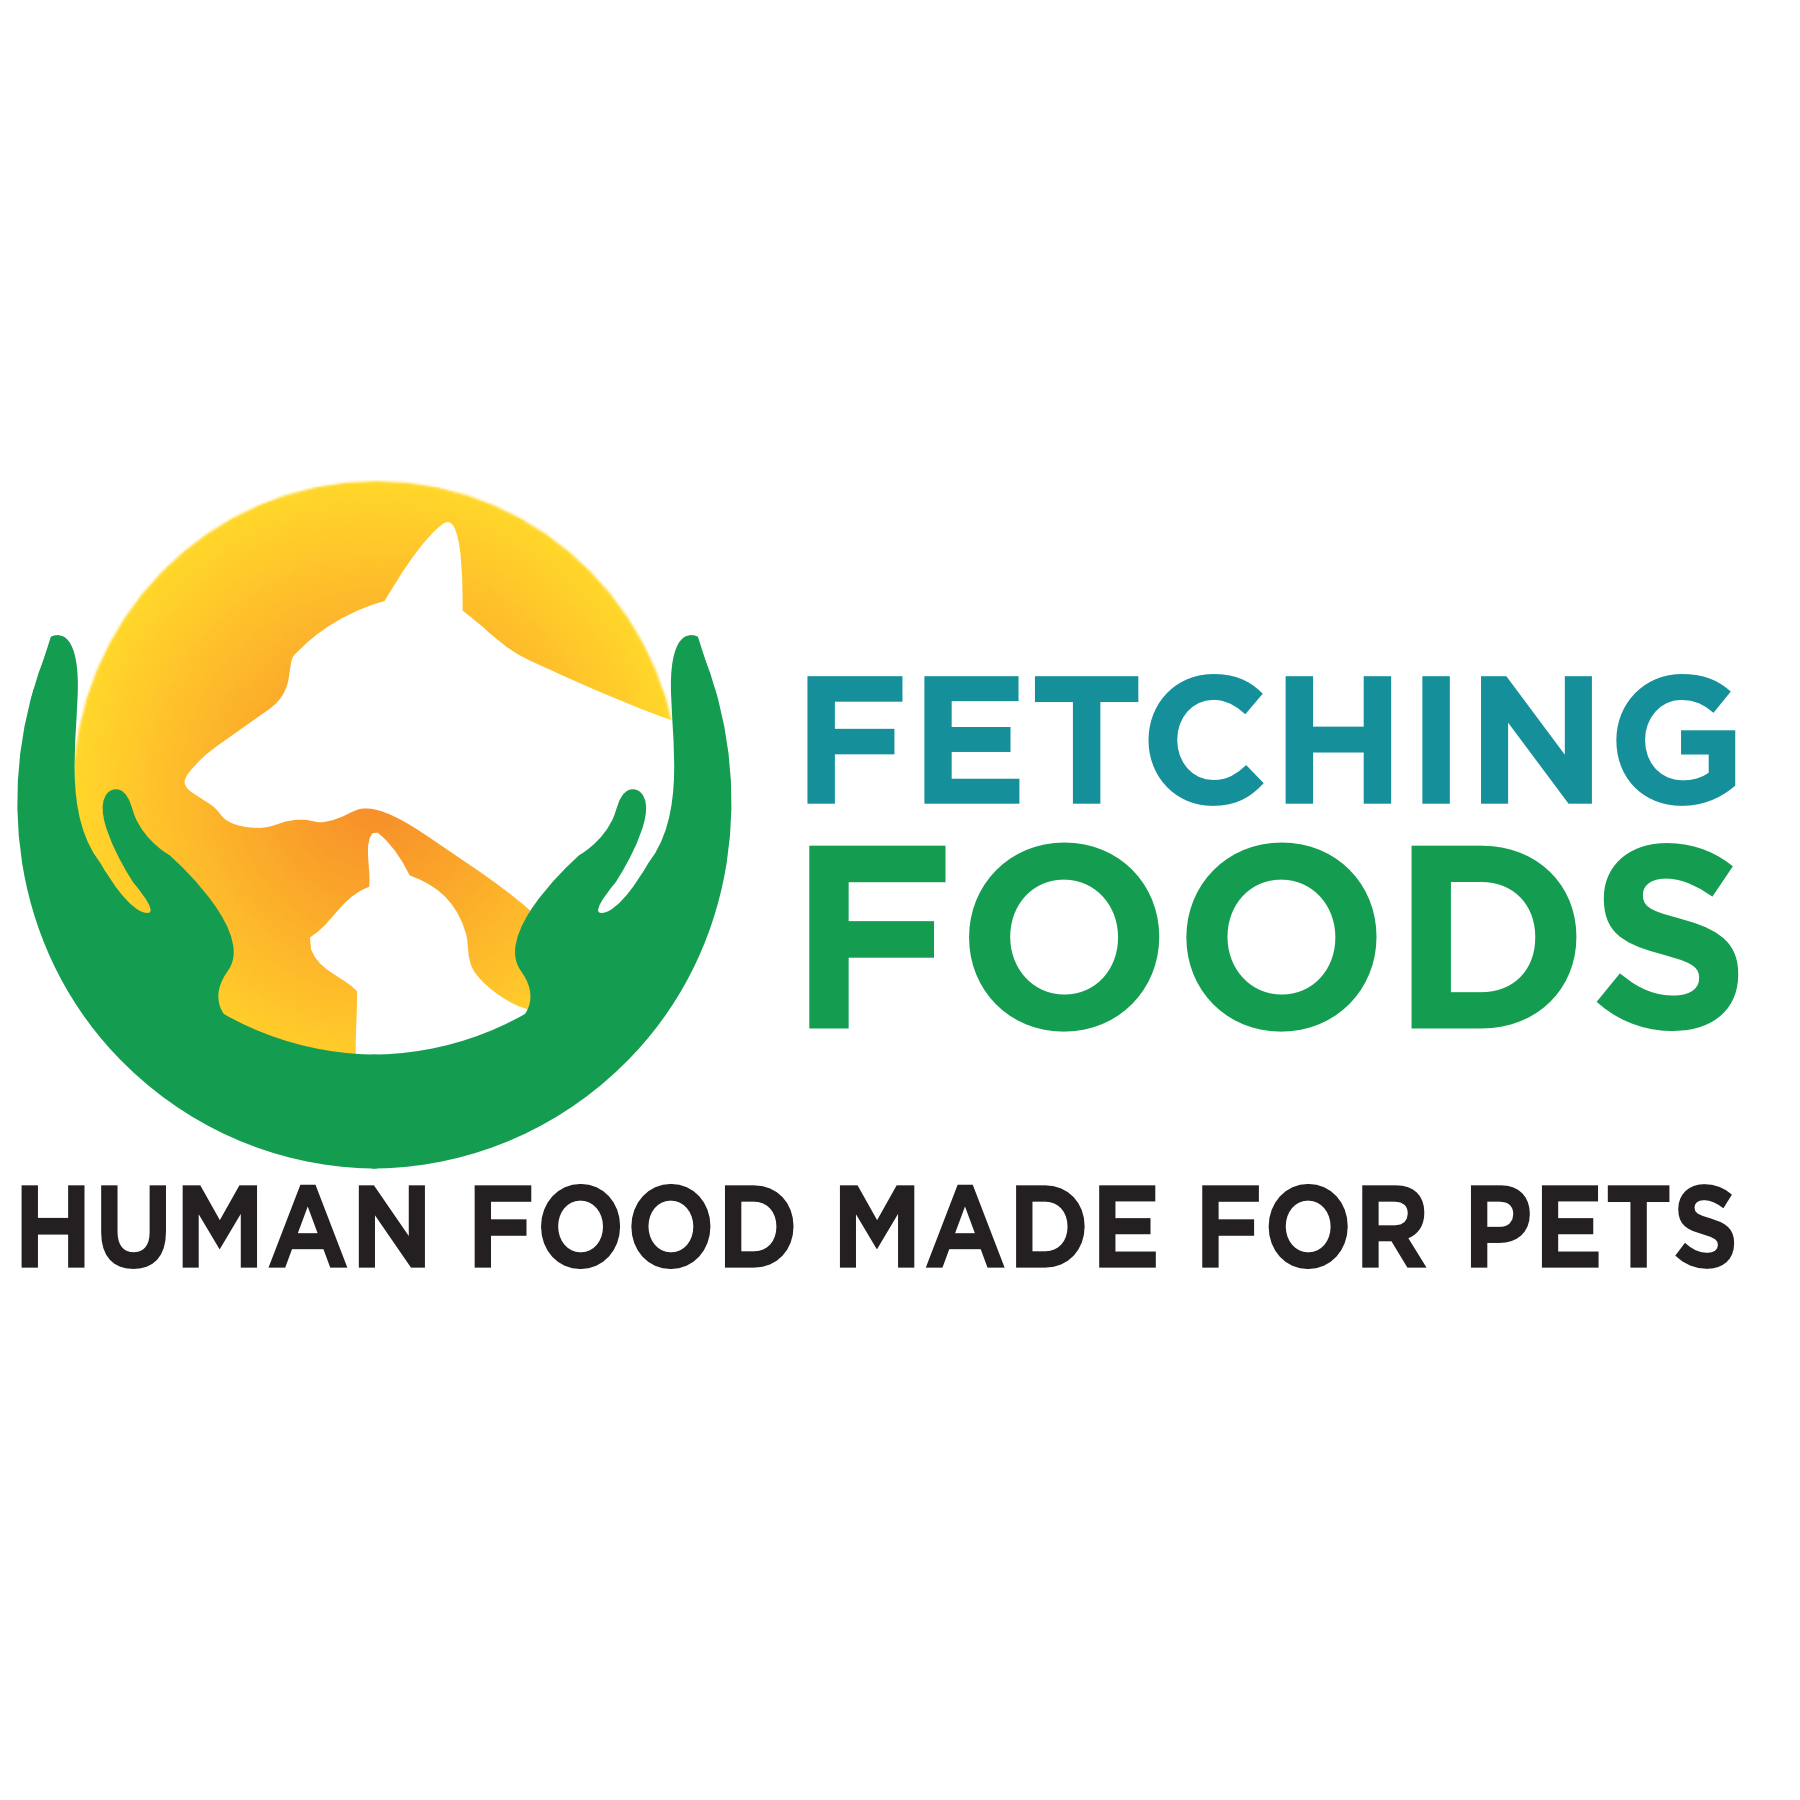 Raw Pet Food Manufacturing Business Opens in Las Vegas